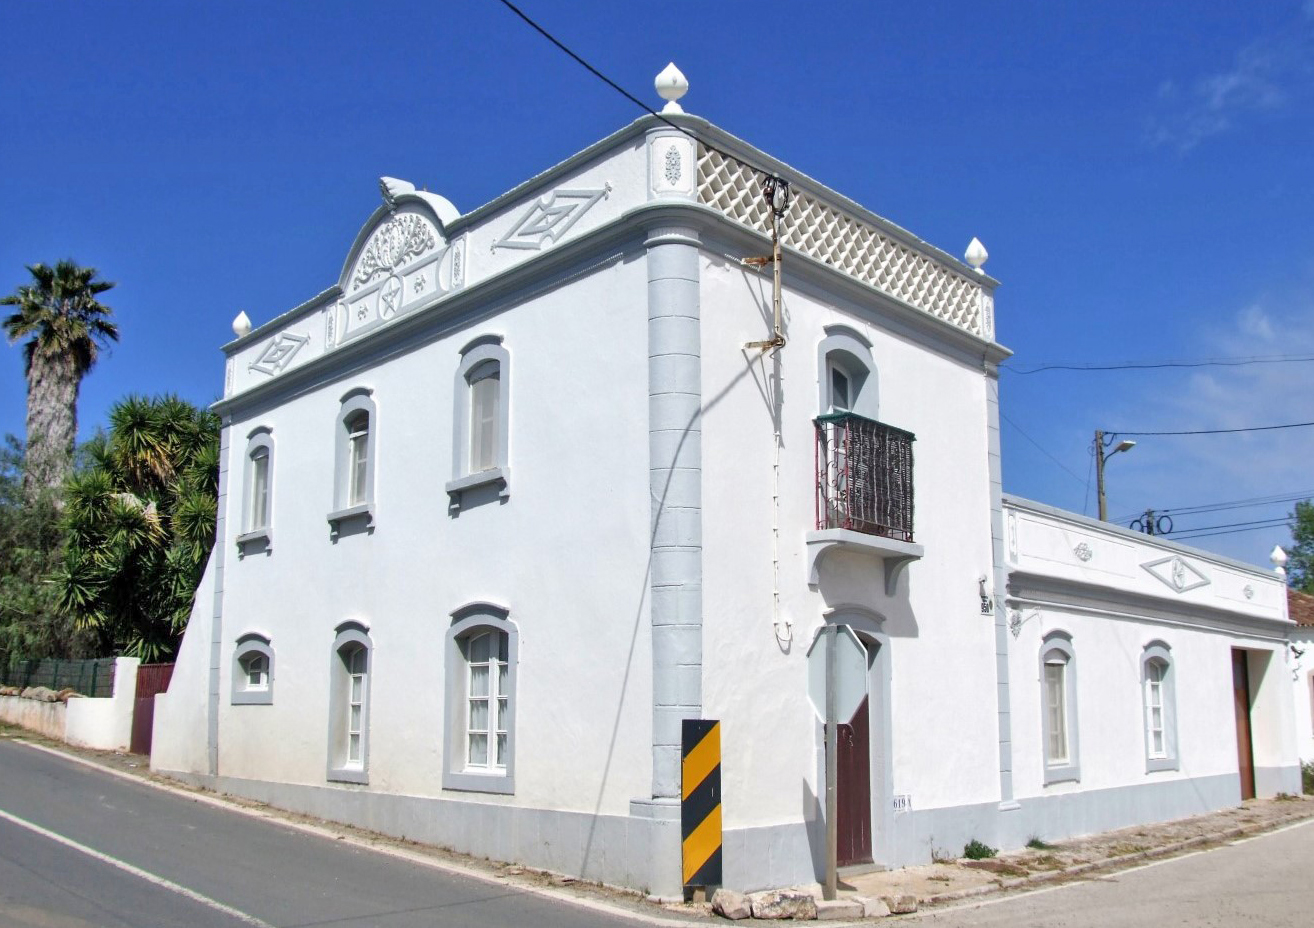 2 Bed, 2 Bath, HouseFor Sale, Charming and Traditional Two Bedroom Country House, Algarve